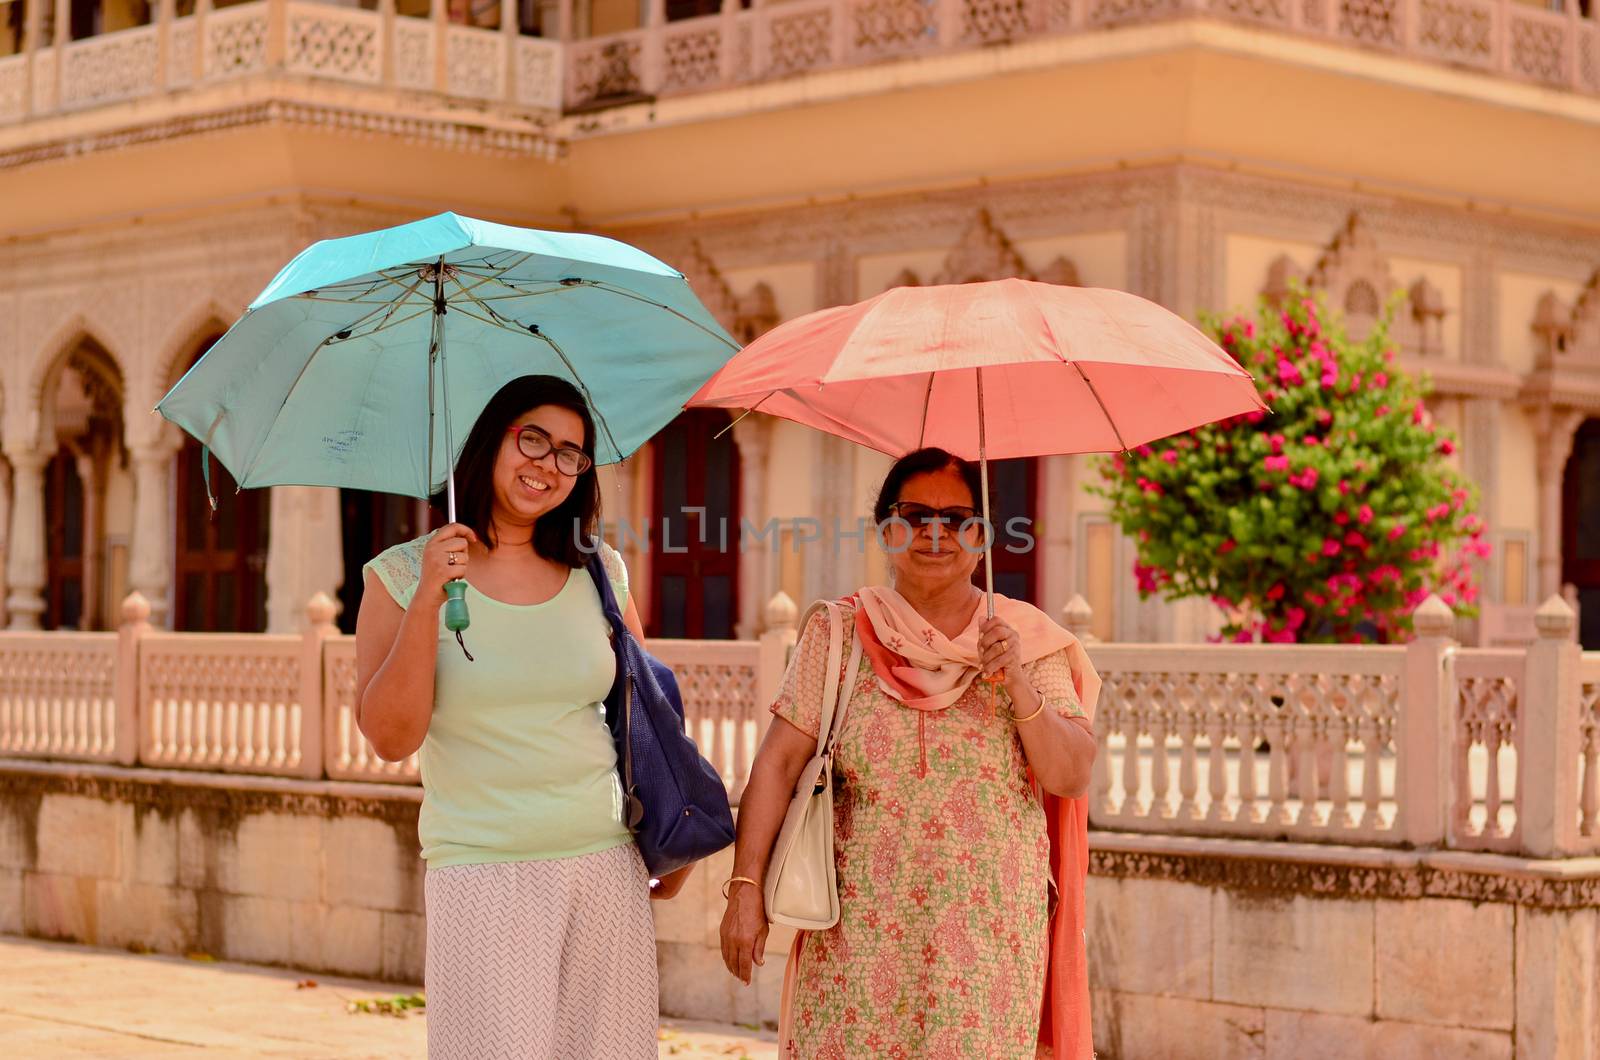 Happy looking young and old (mother - daughter) tourists posing in Jaipur's City Palace with umbrellas matching their outfits in City Palace, Jaipur, Rajasthan, India